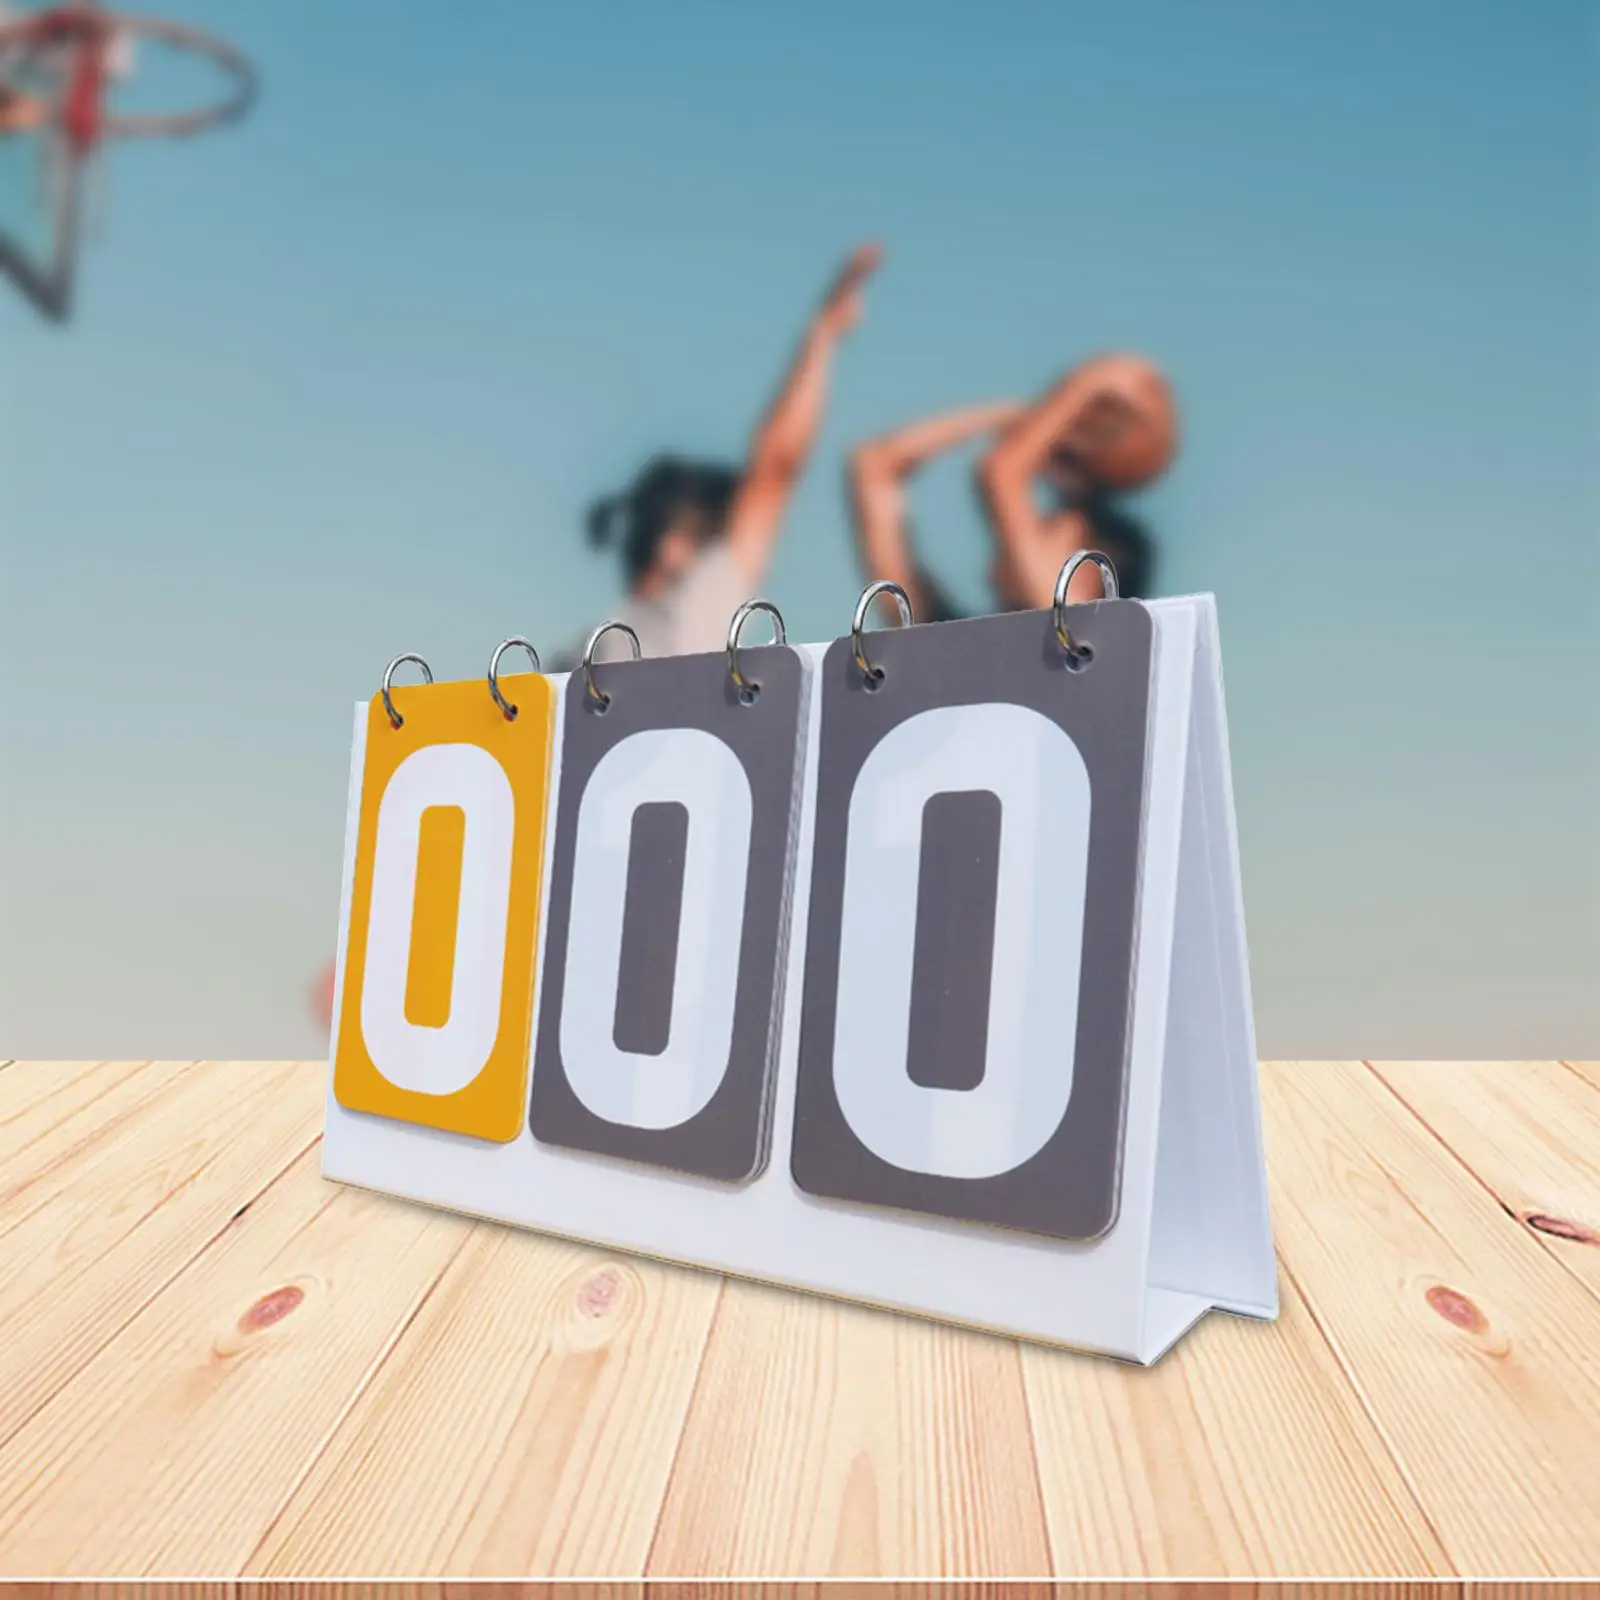 Score Board Indoor Games Game Portable for Basketball Baseball Tennis Competition 3 digits Tabletop Sports Score Flip Scoreboard